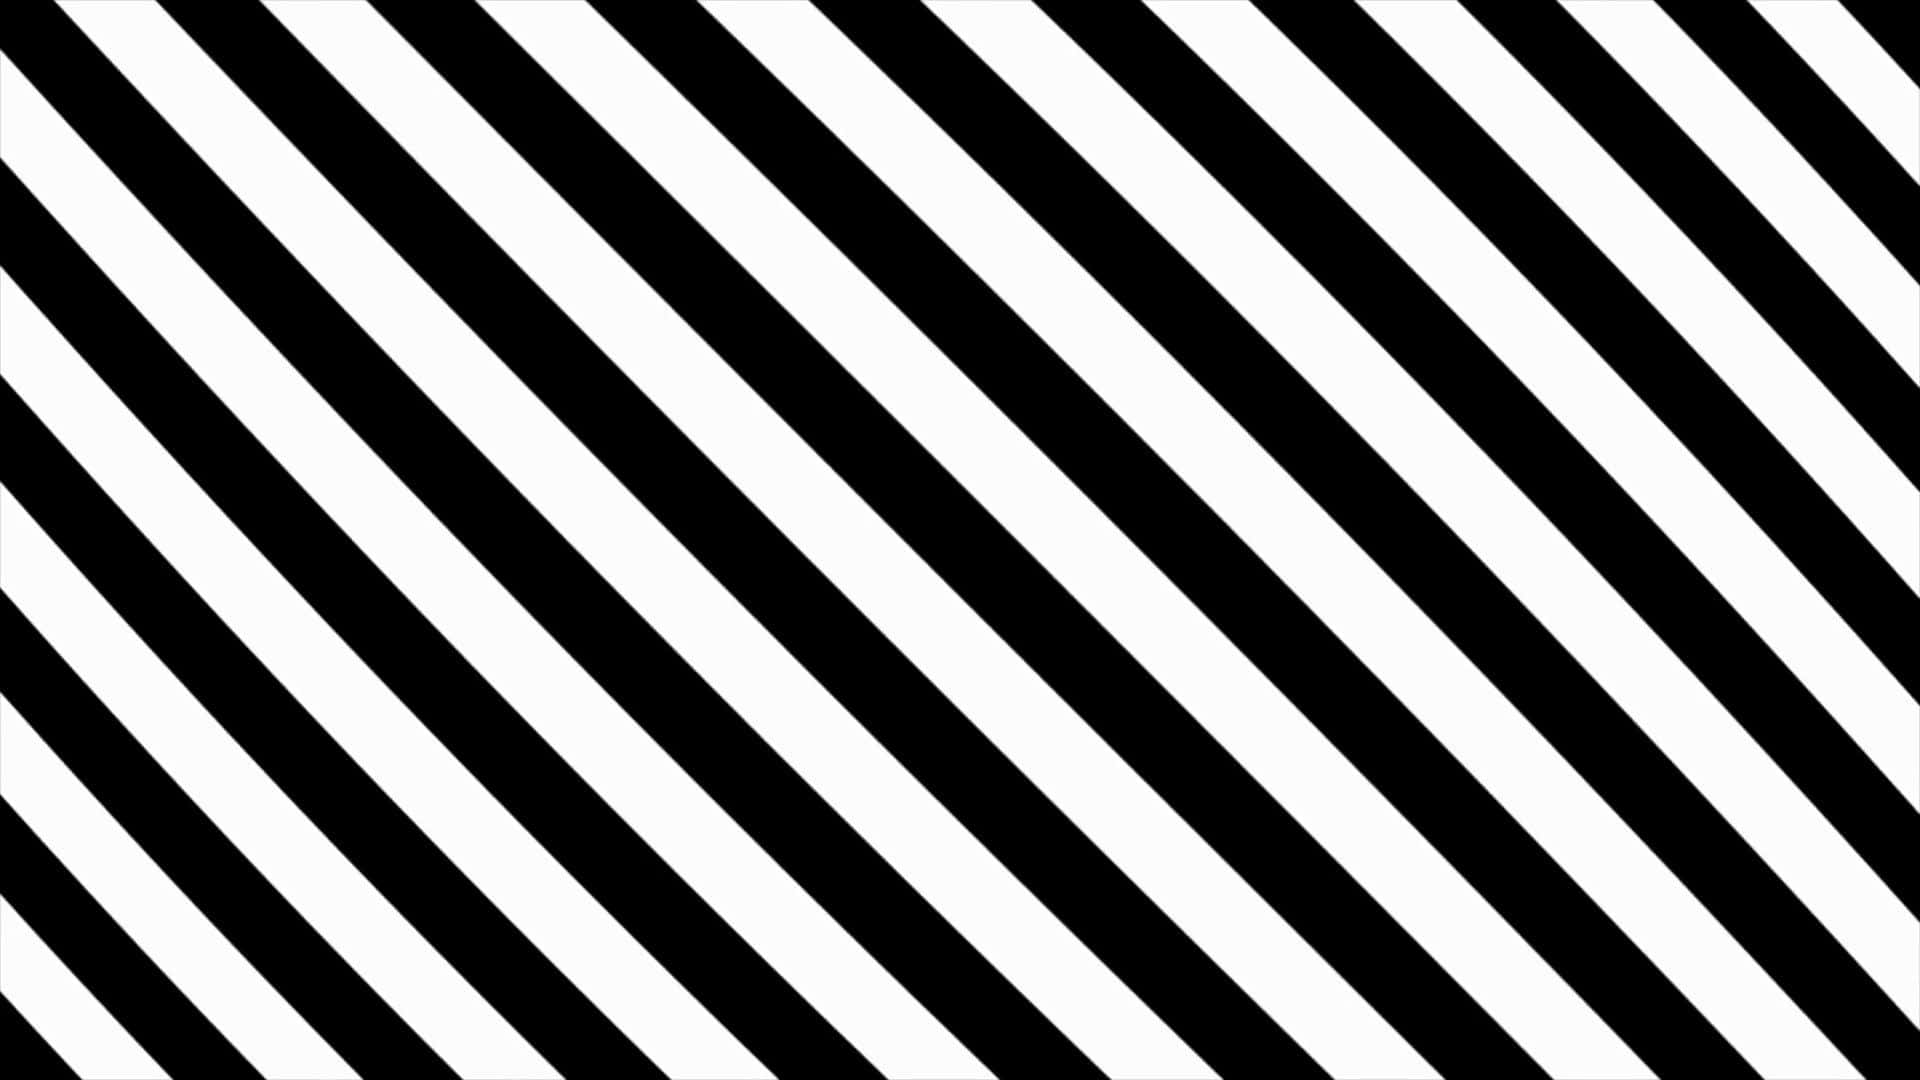 A Black And White Striped Pattern Background